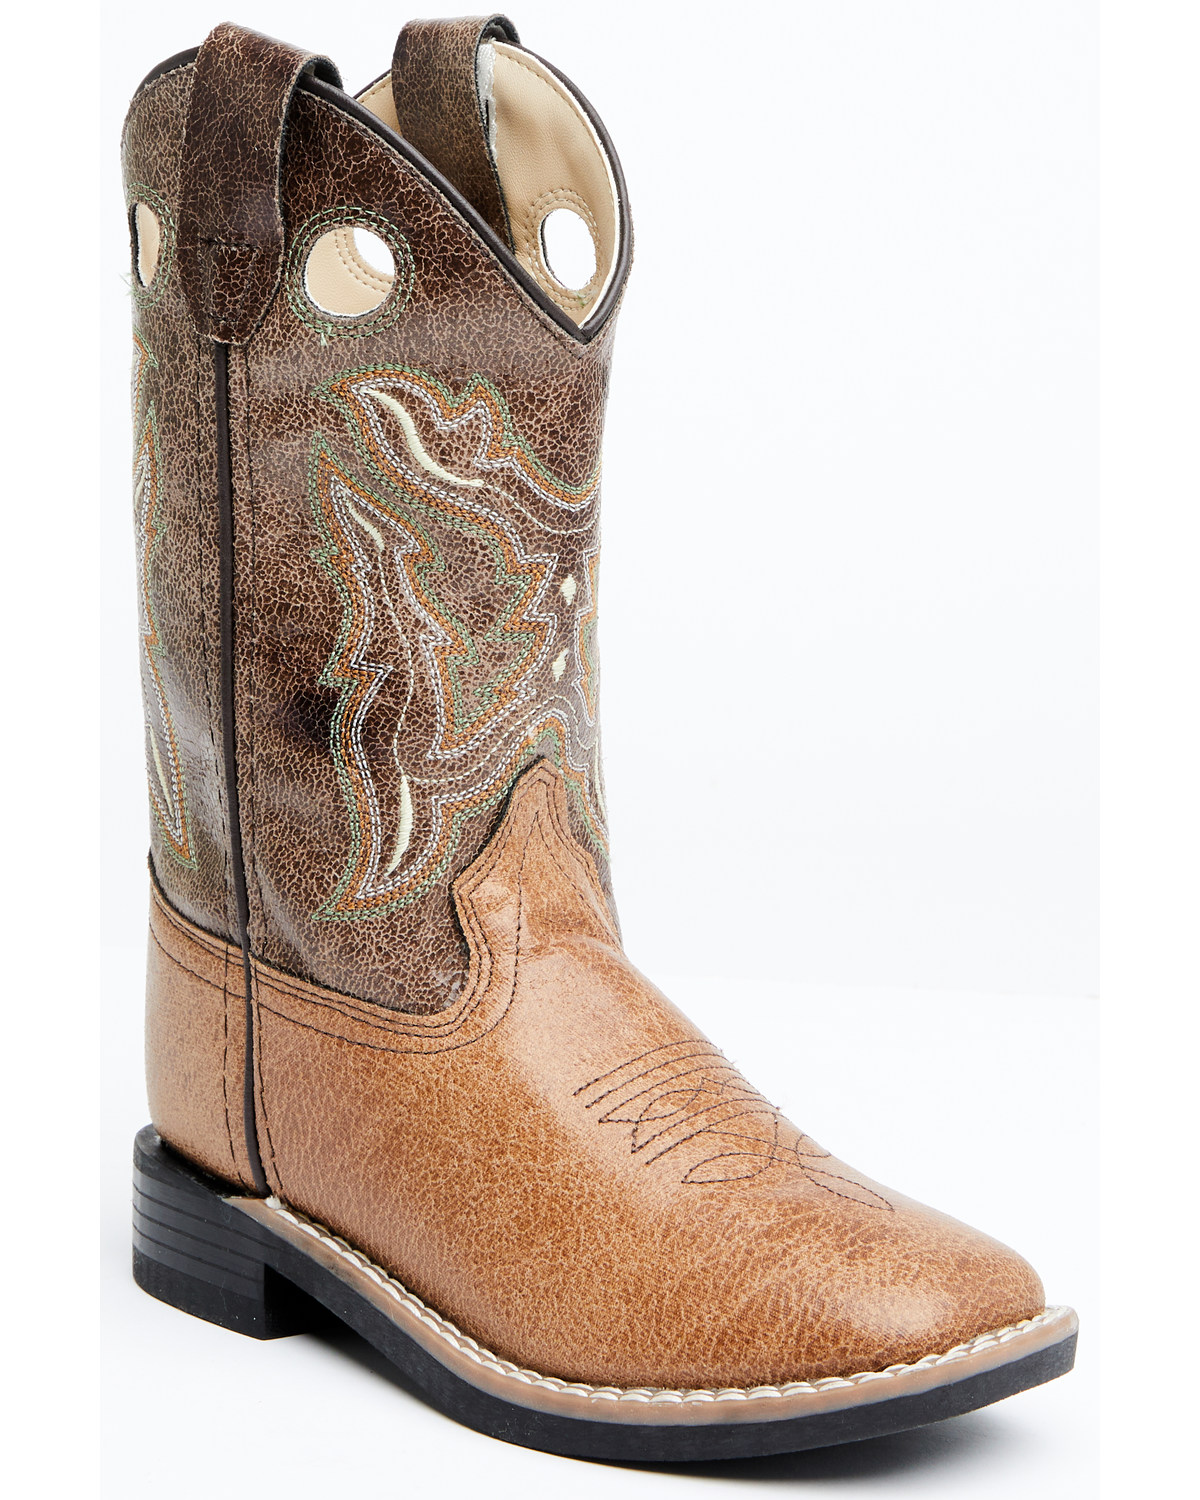 Cody James Boys' Colton Western Boots - Broad Square Toe